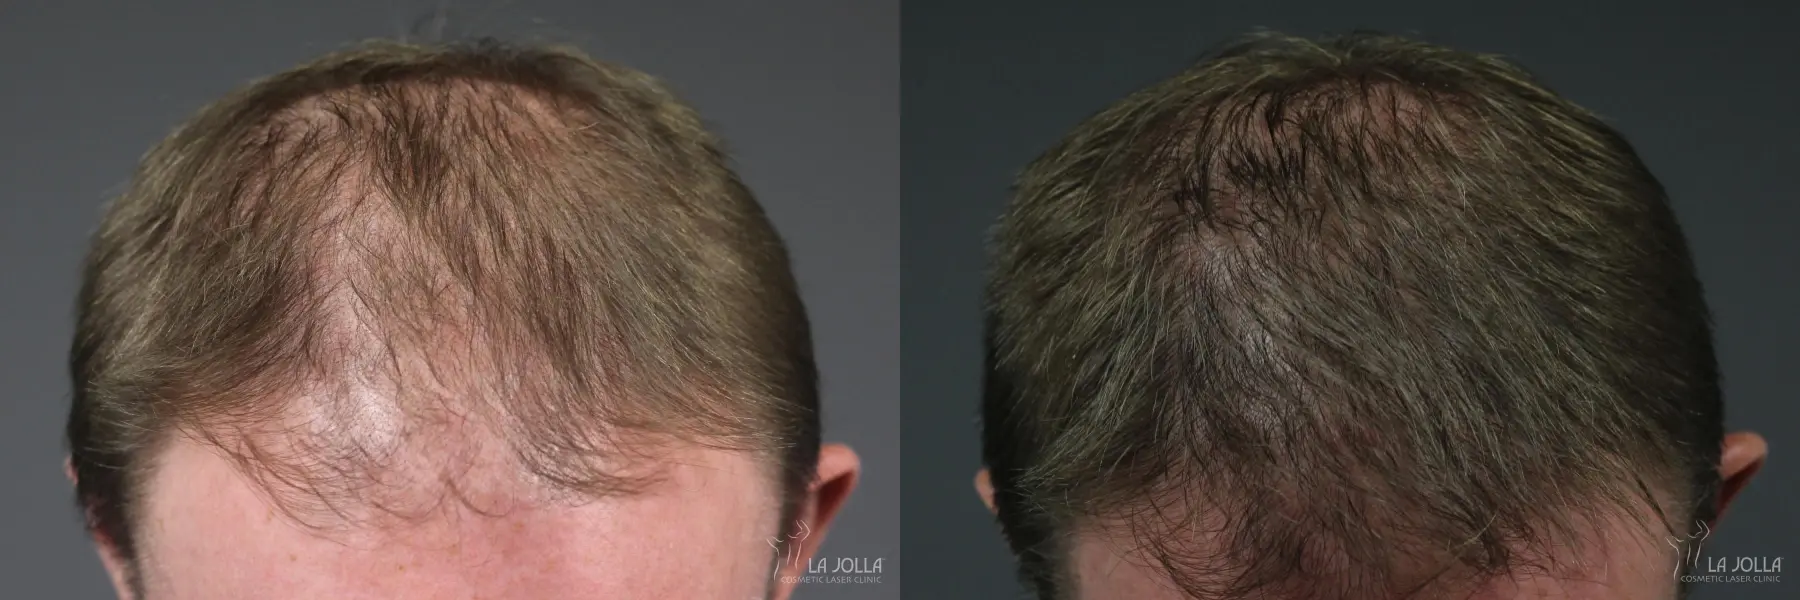 PRP (Platelet-Rich Plasma): Patient 4 - Before and After 1